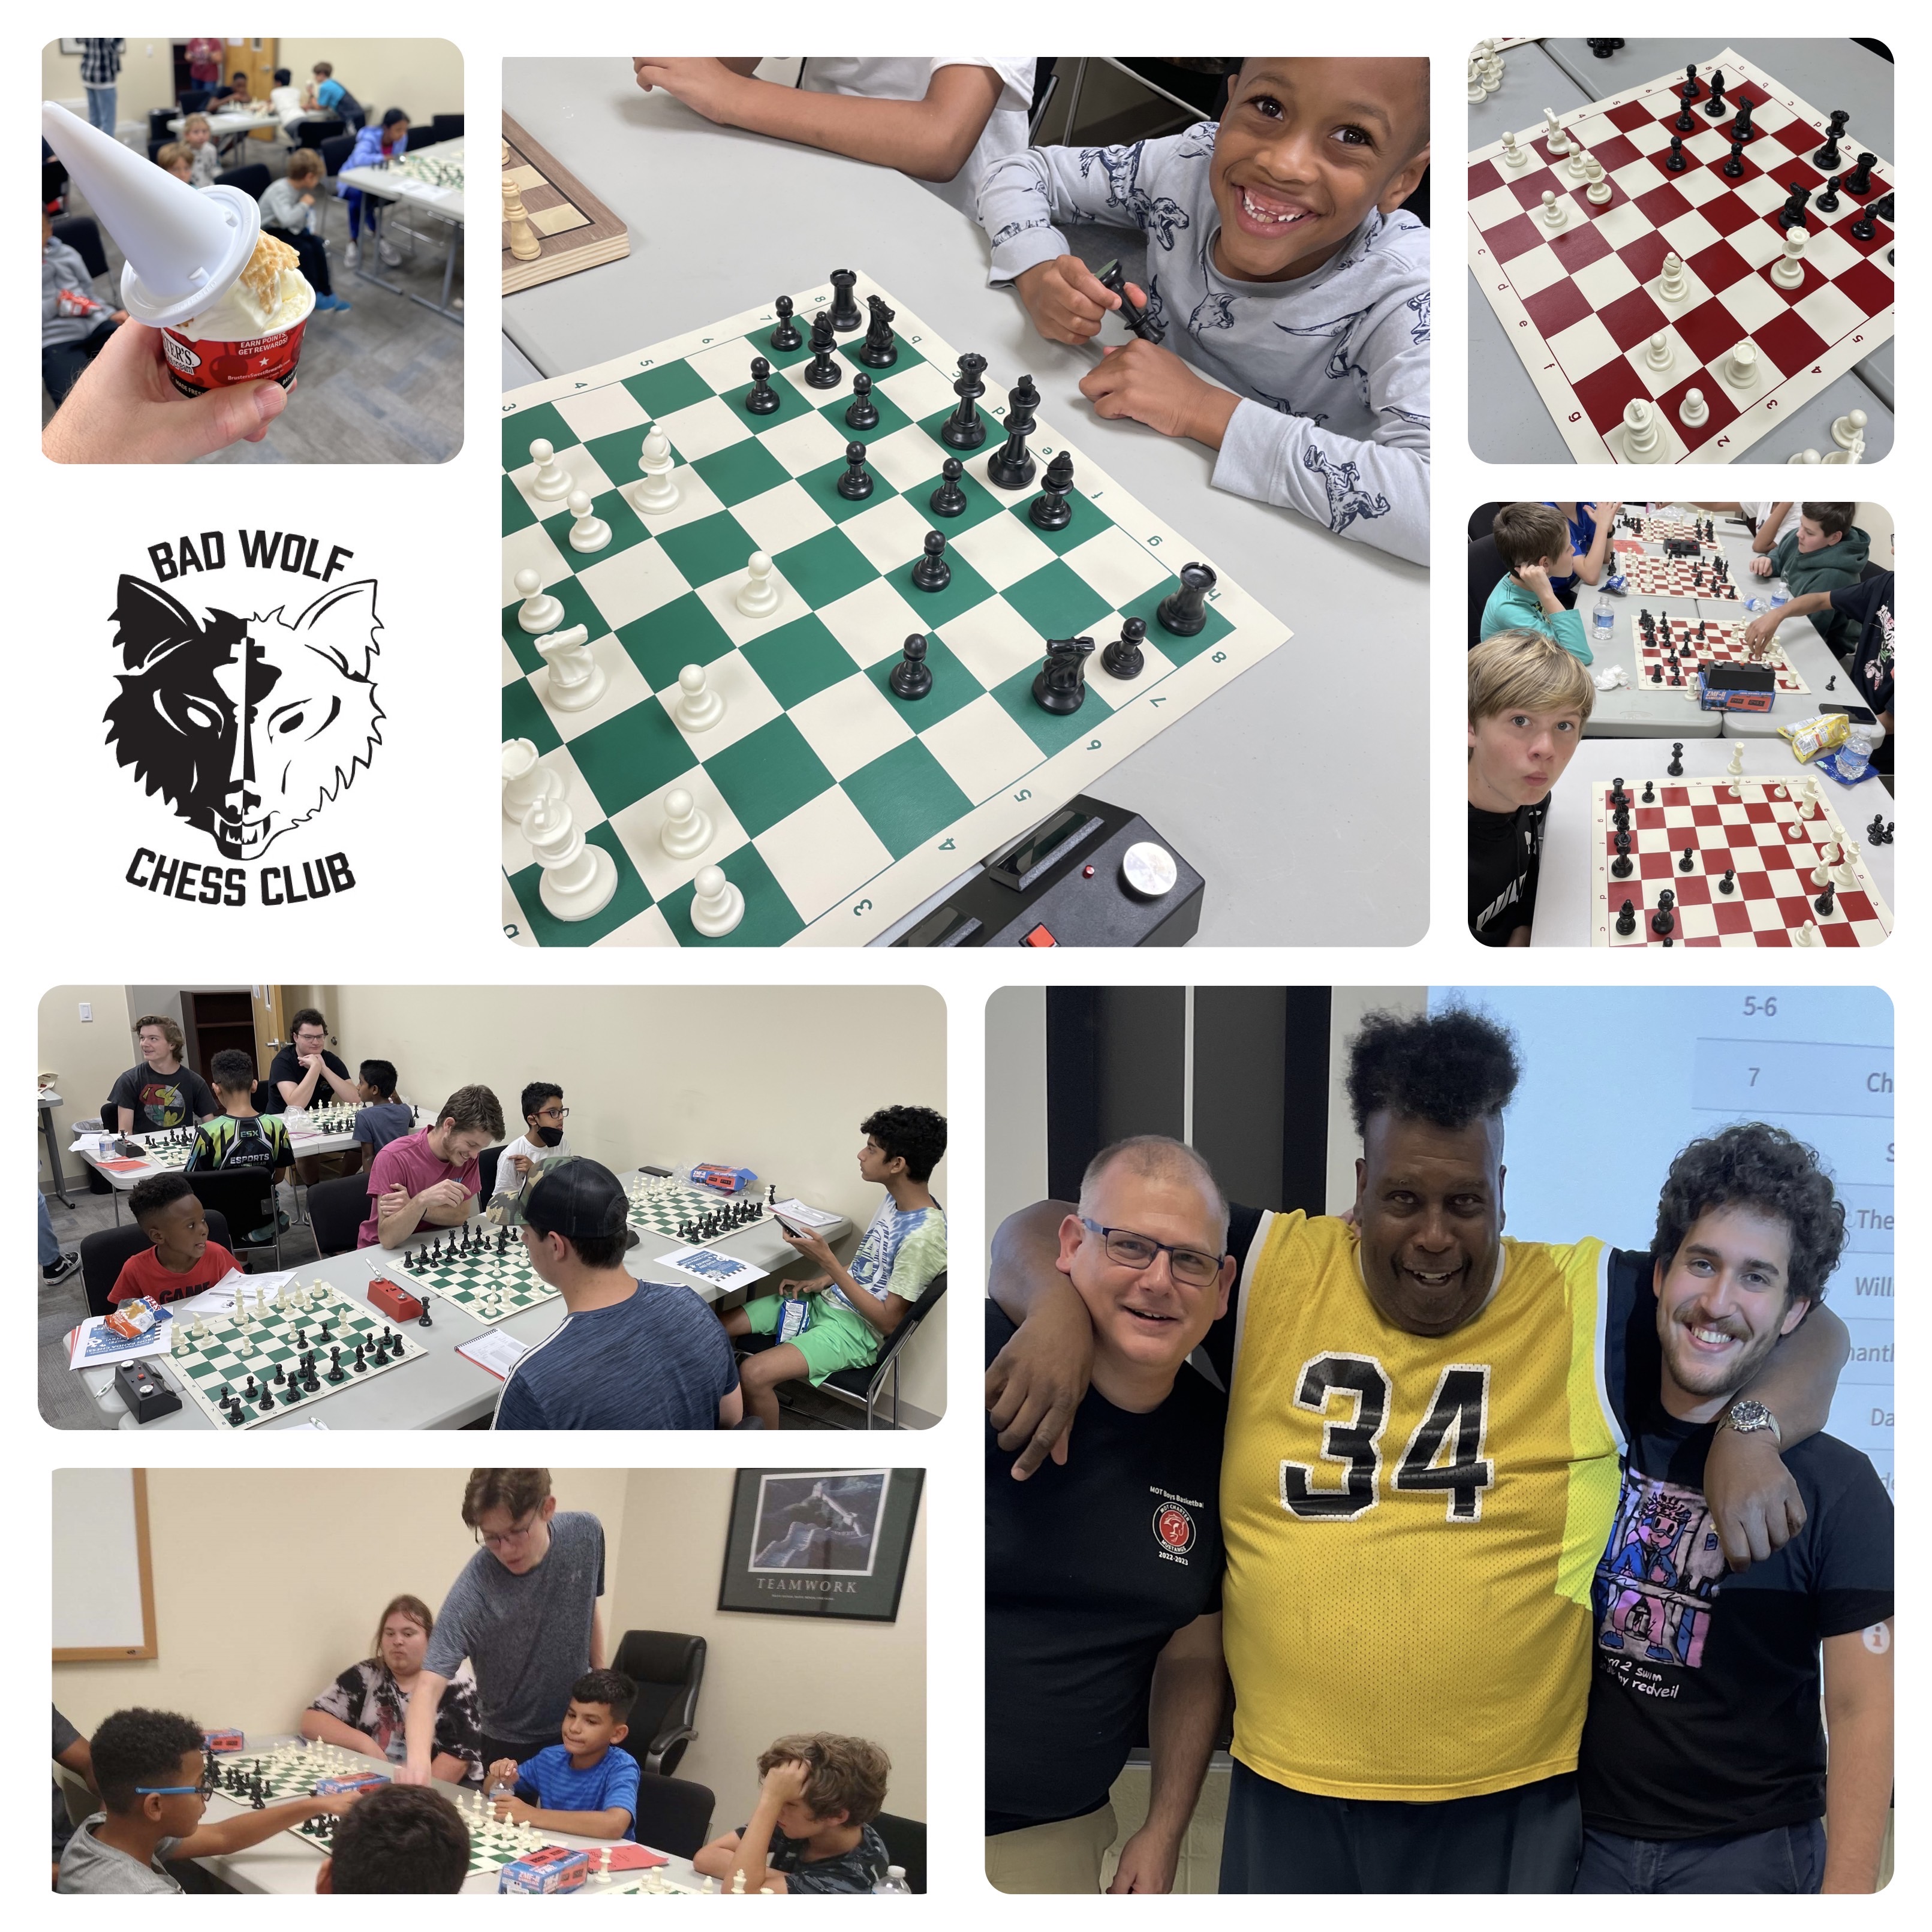 Bad Wolf Chess Club Compilation Playing Chess and Having Fun